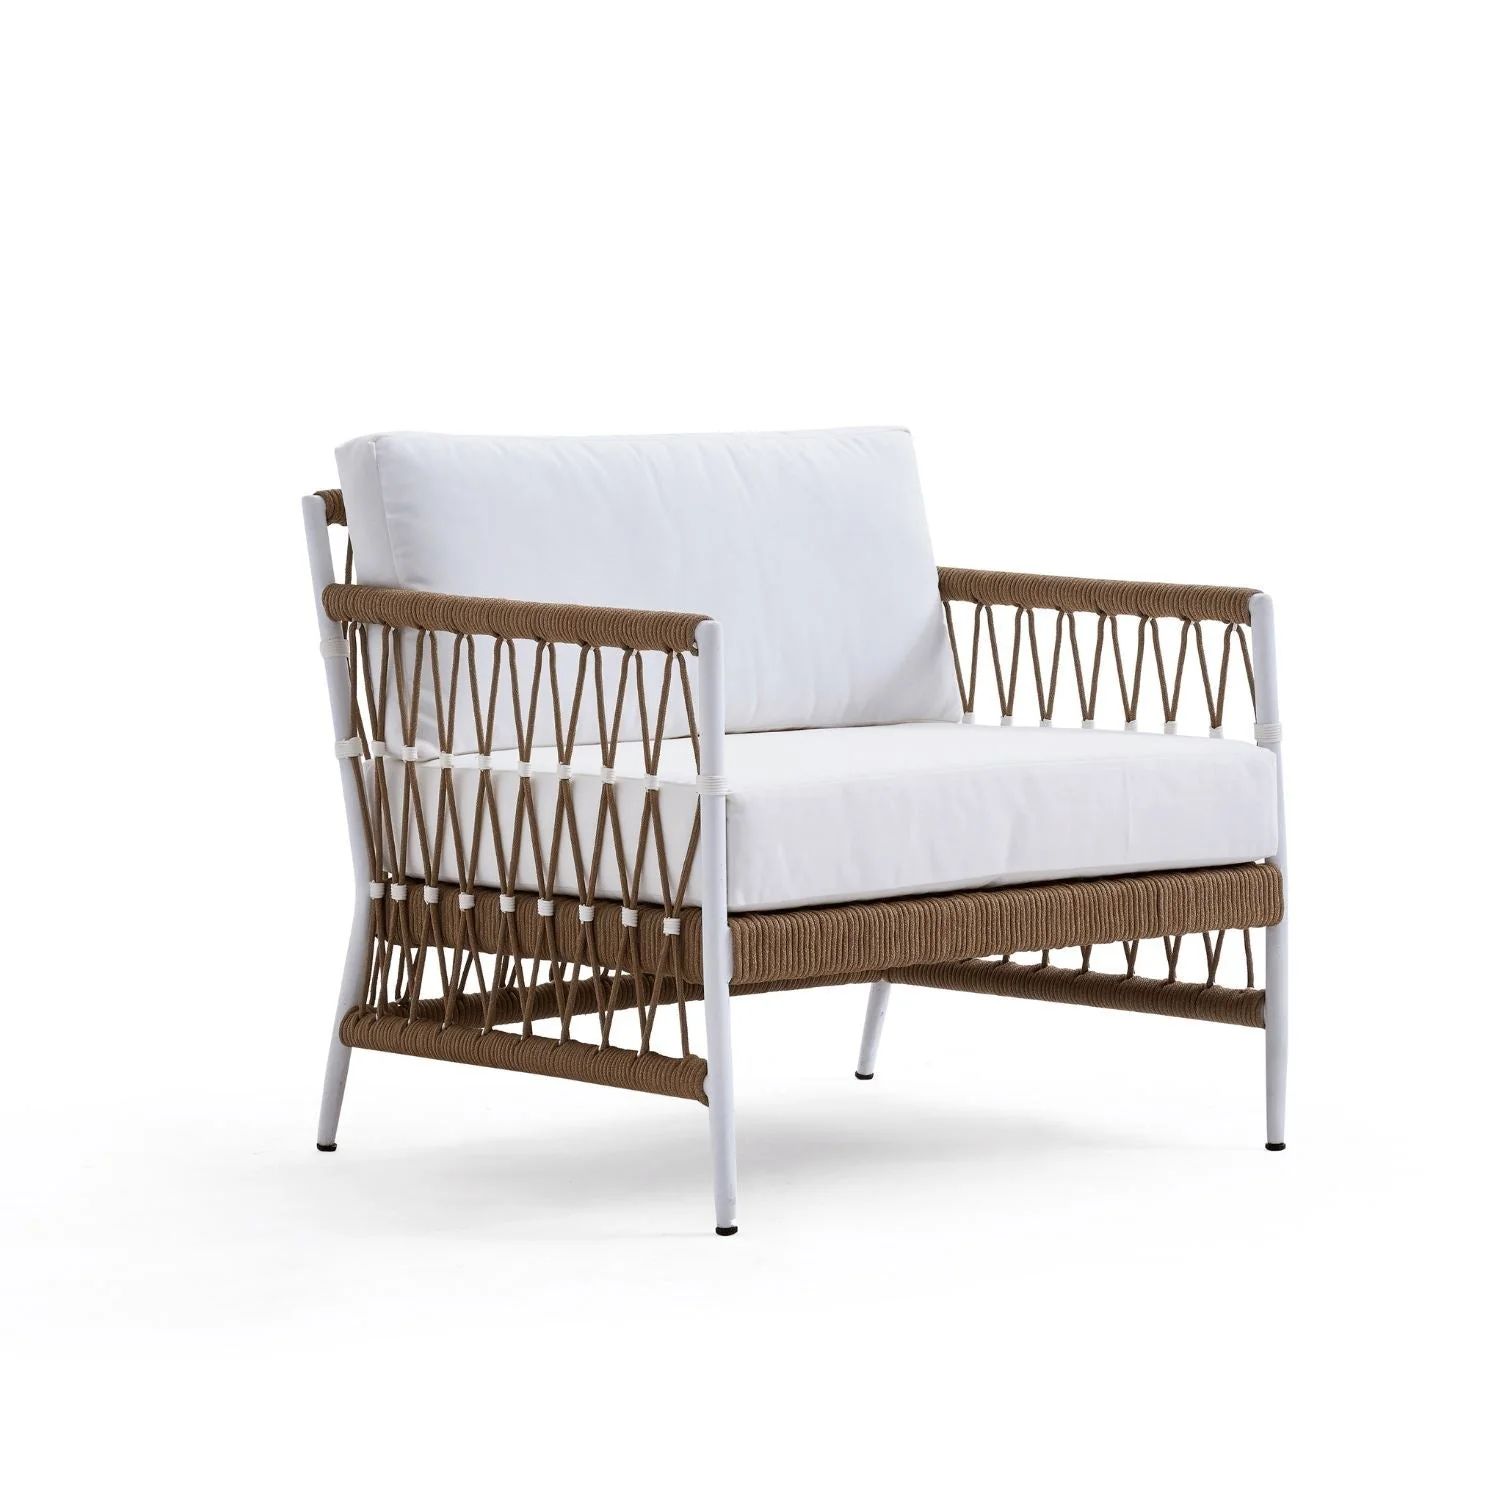 Salty Day Chair | Valyou Furniture